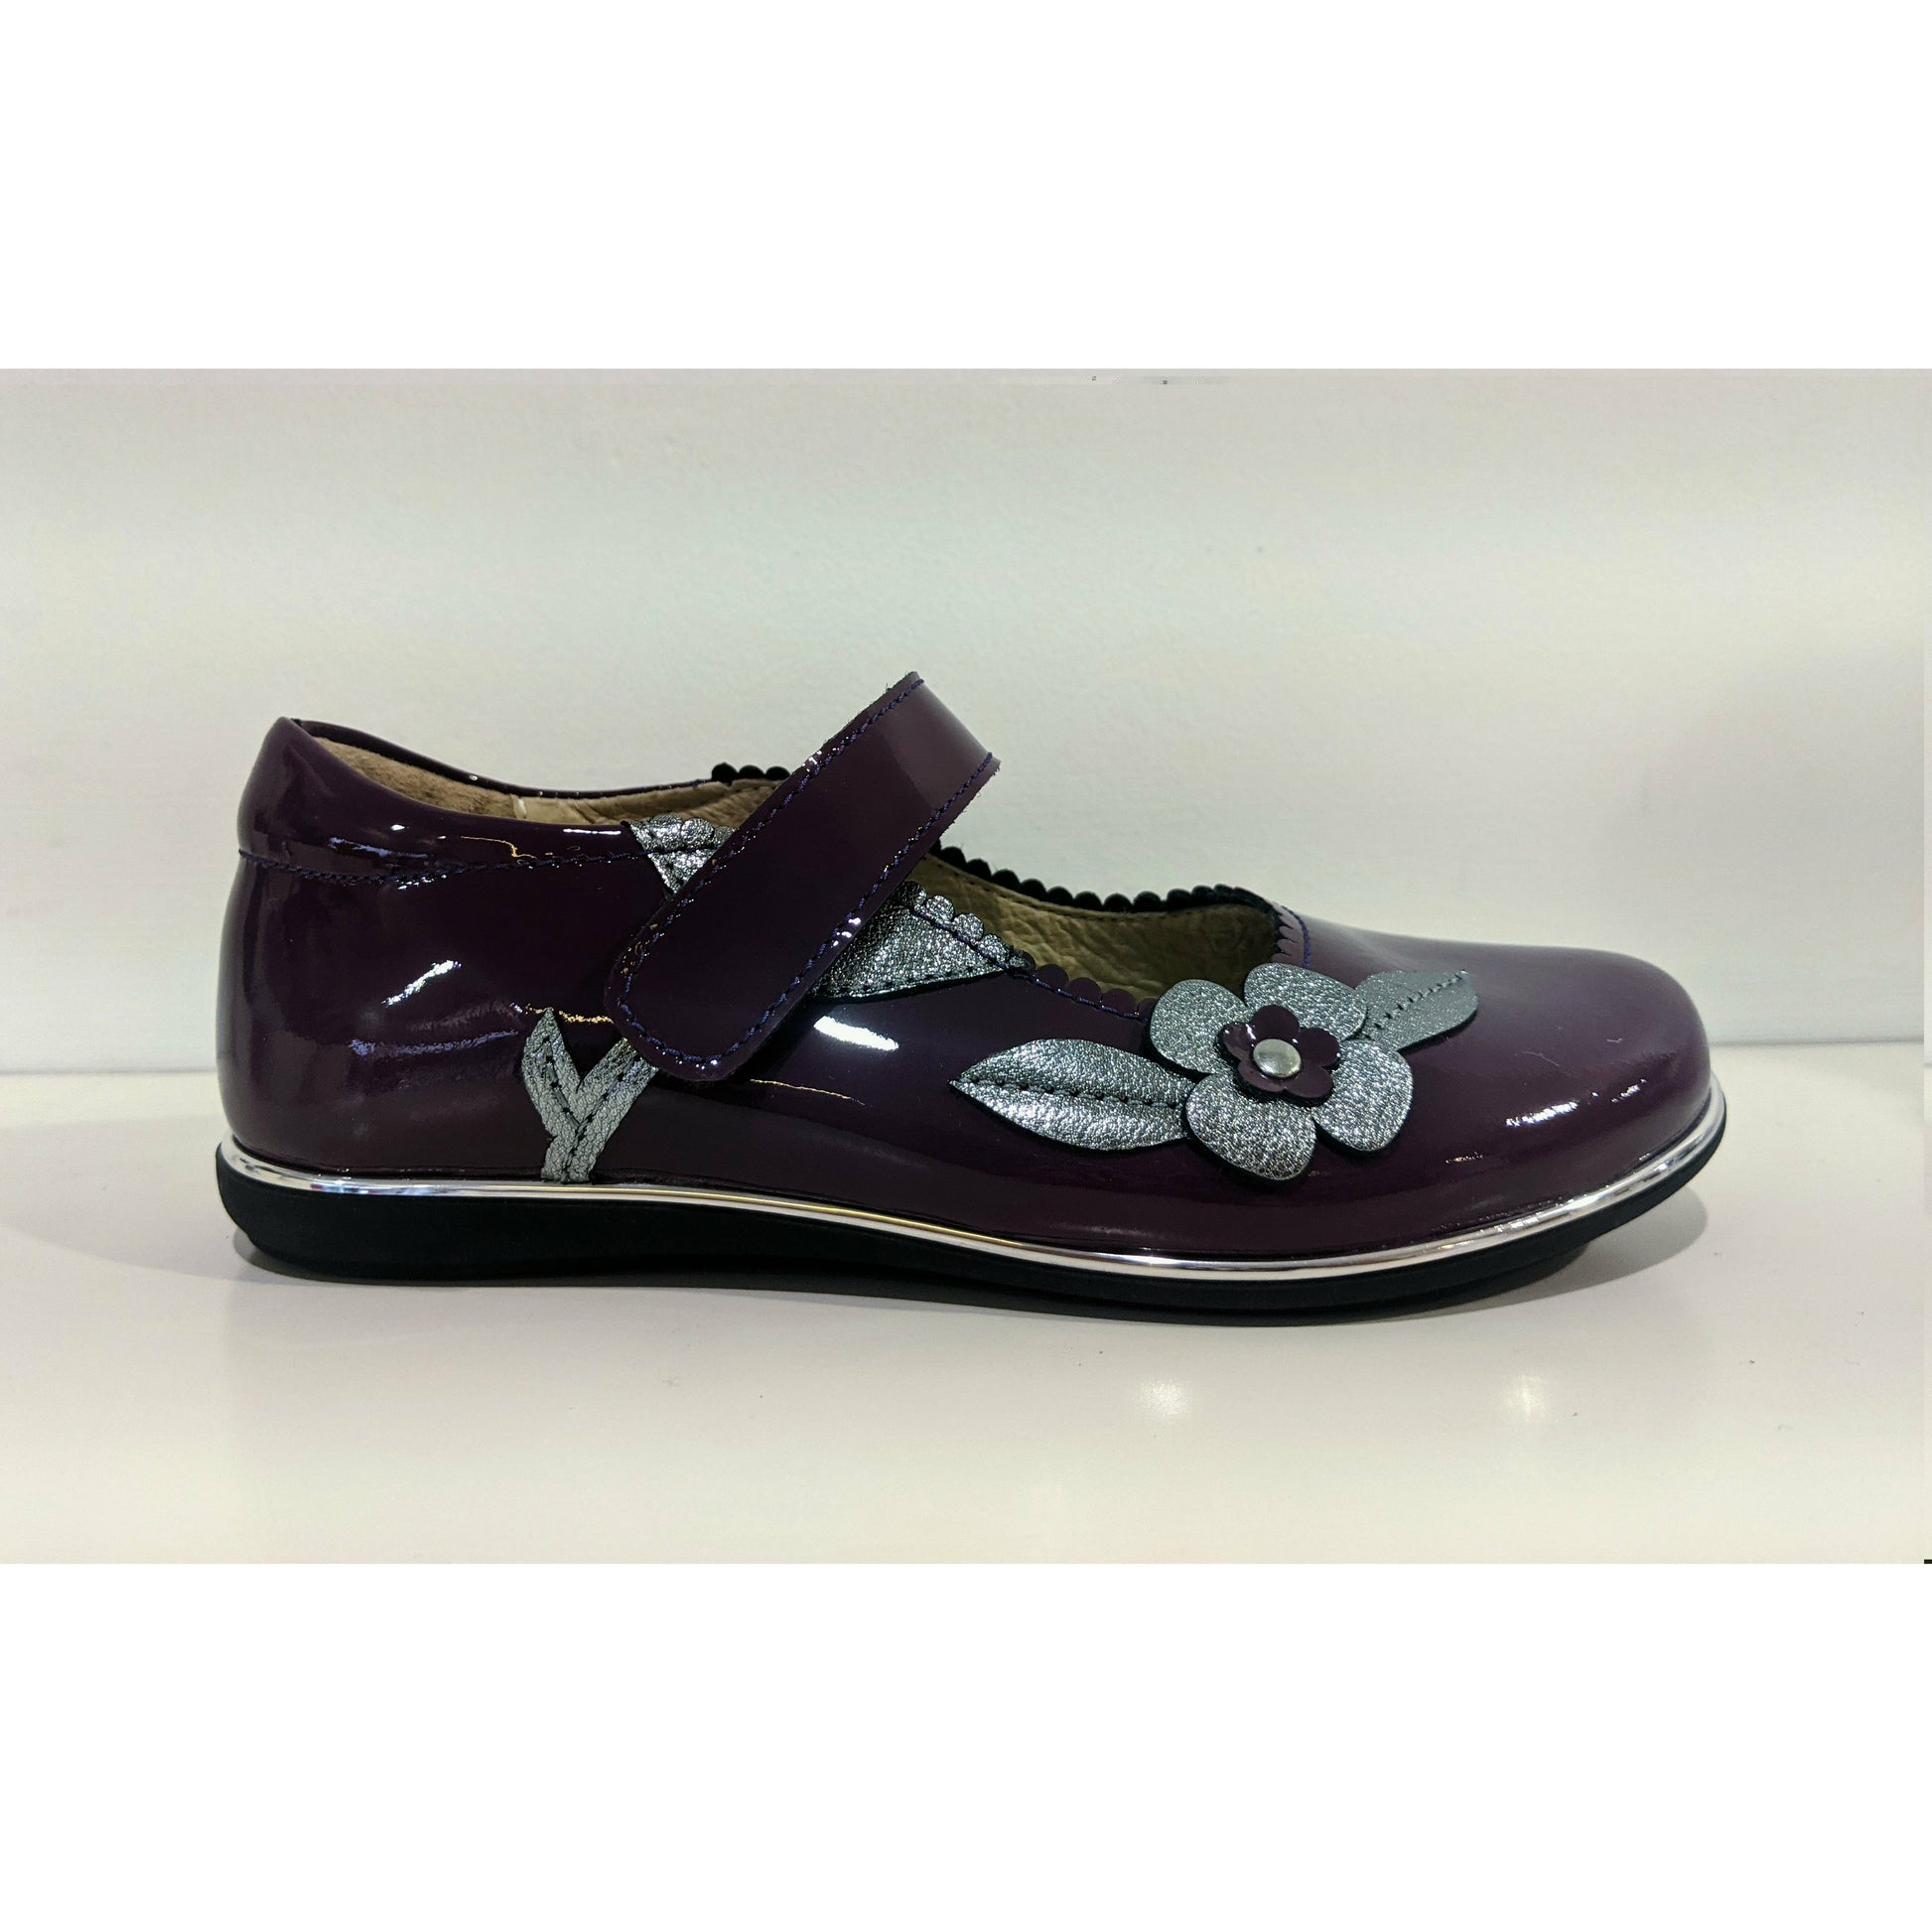 A girls Mary Jane shoe by Petasil,style Caren, in purple patent and silver with velcro fastening. Right side view.